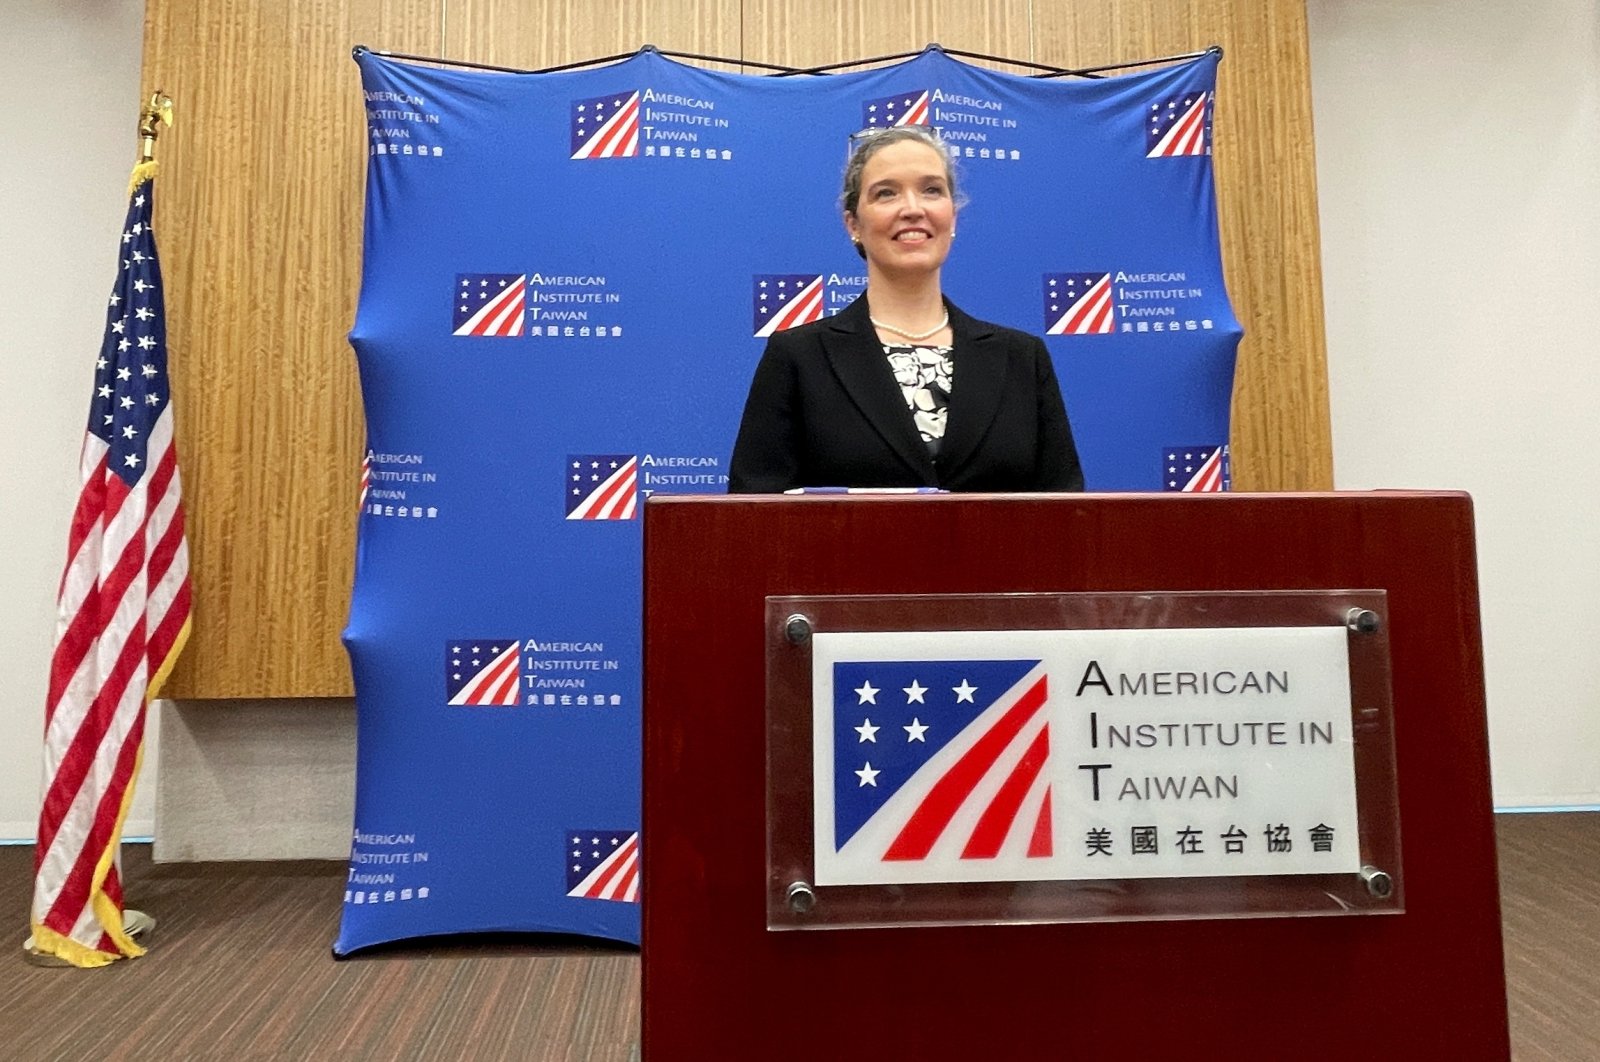 American Institute in Taiwan (AIT) Director Sandra Oudkirk attends a news conference in Taipei, Taiwan, Oct. 29, 2021. (Reuters Photo)